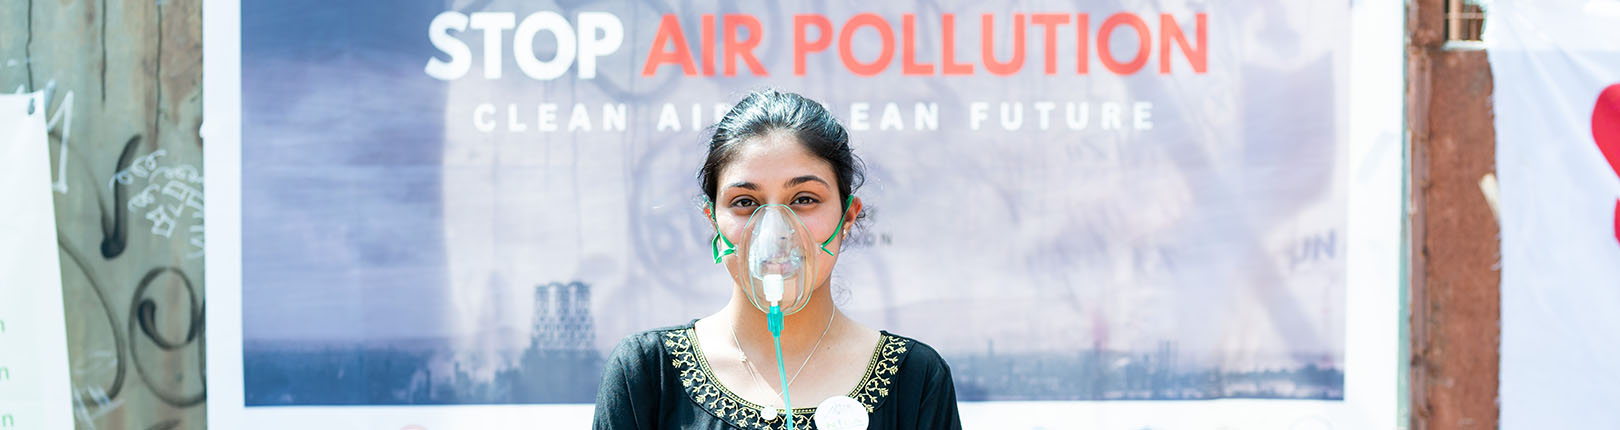 A woman wearing an oxygen masks poses in front of a sign that says "stop air pollution."